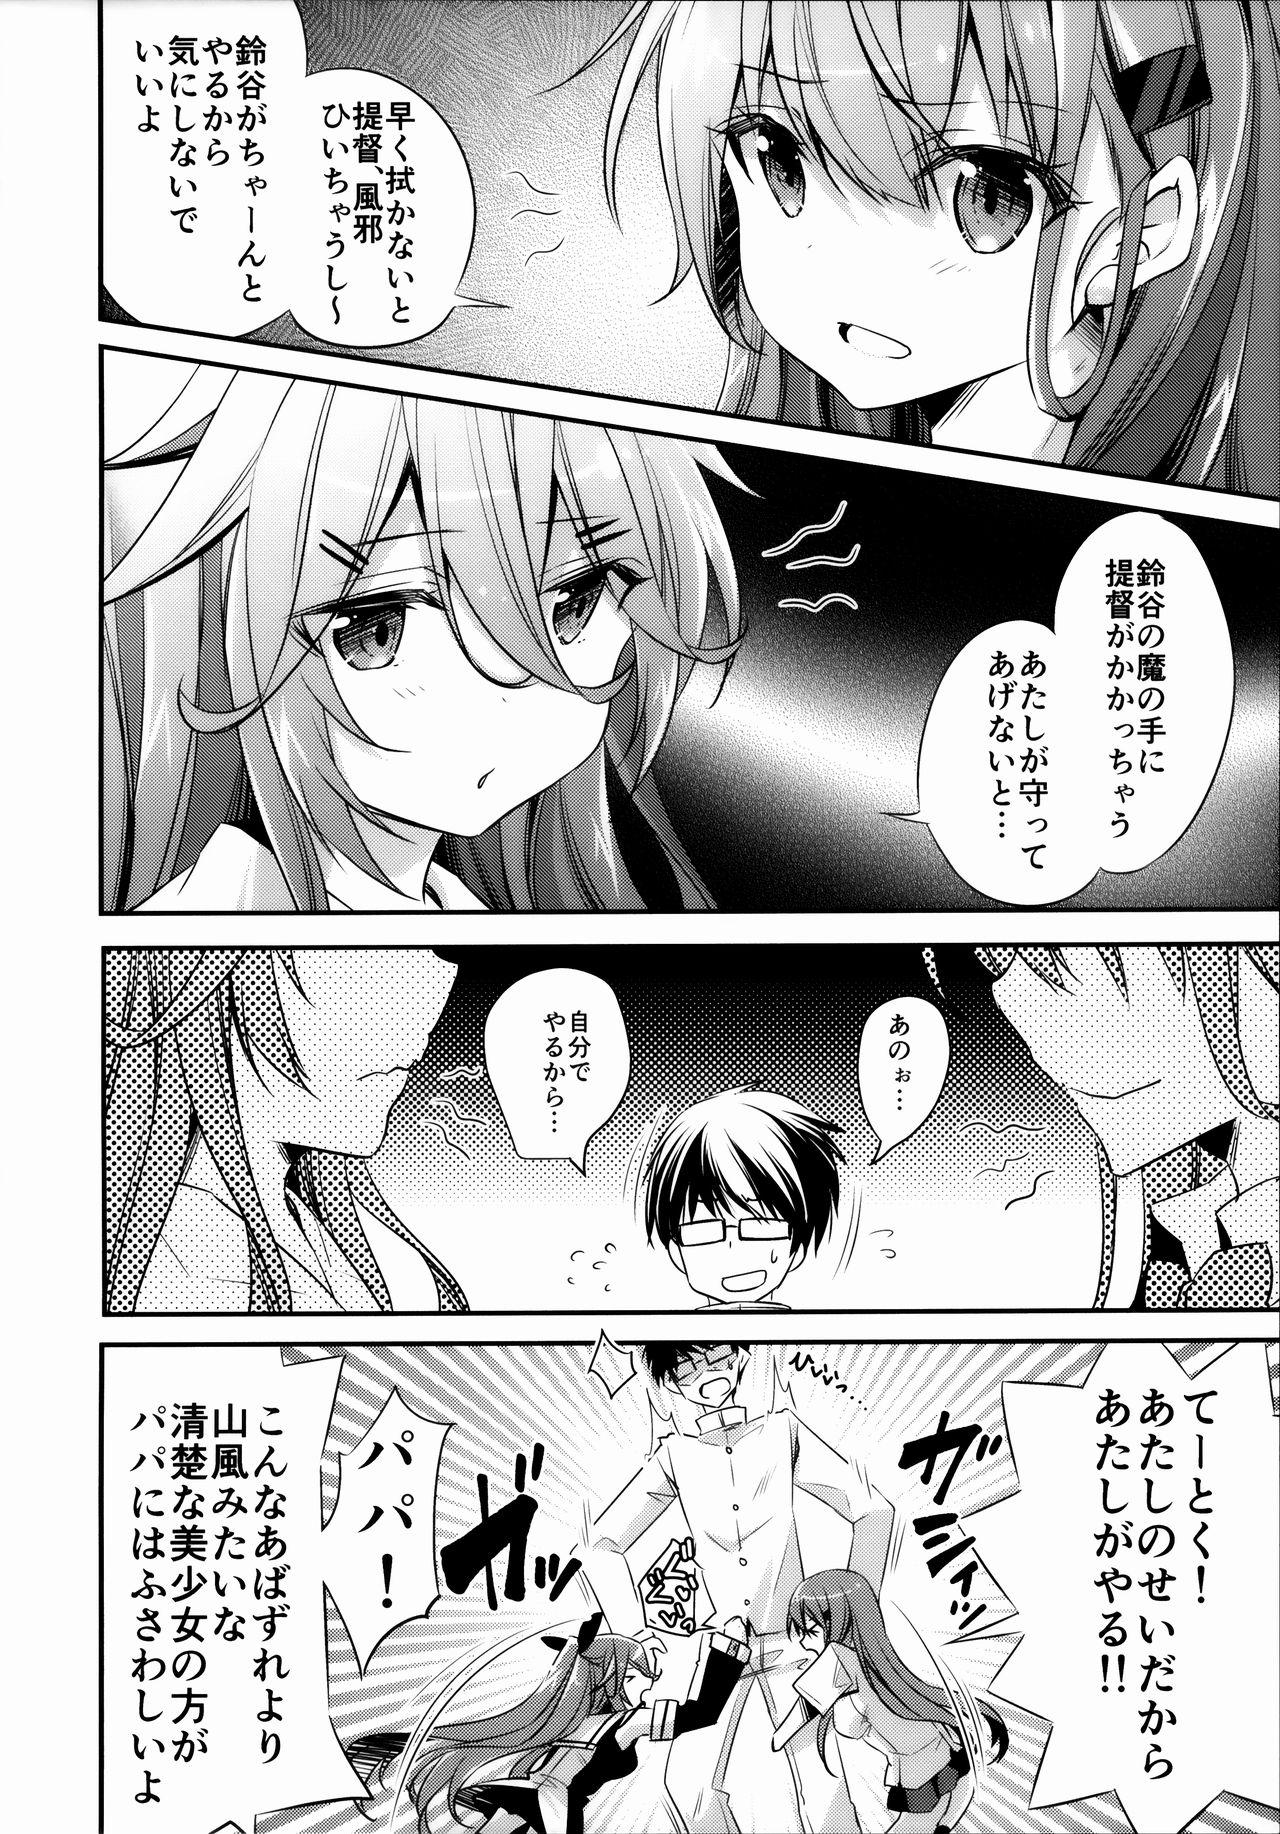 Pierced Catfight!? - Kantai collection Spying - Page 7